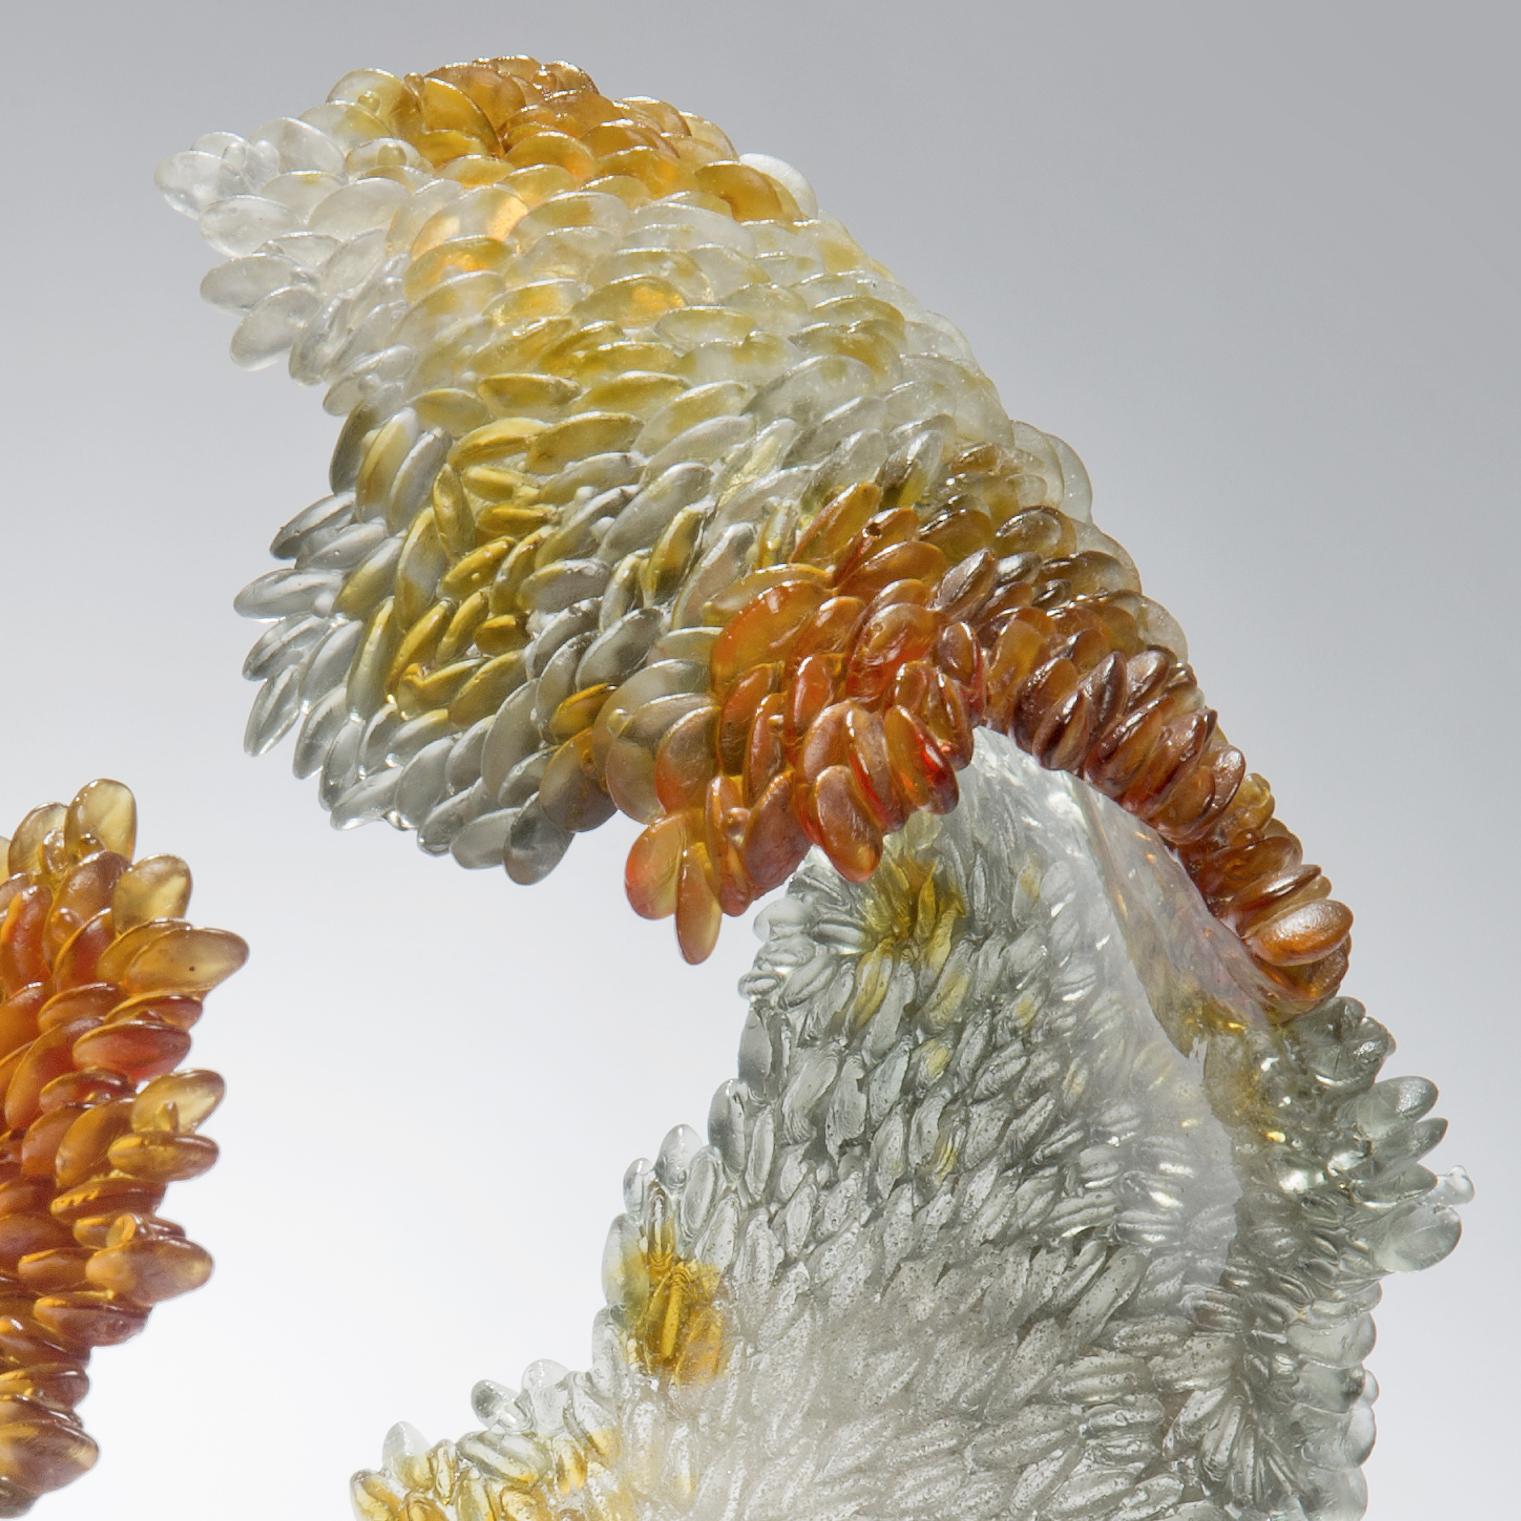 British Changing Colors, a Glass Sculpture in Clear & Amber by Nina Casson McGarva